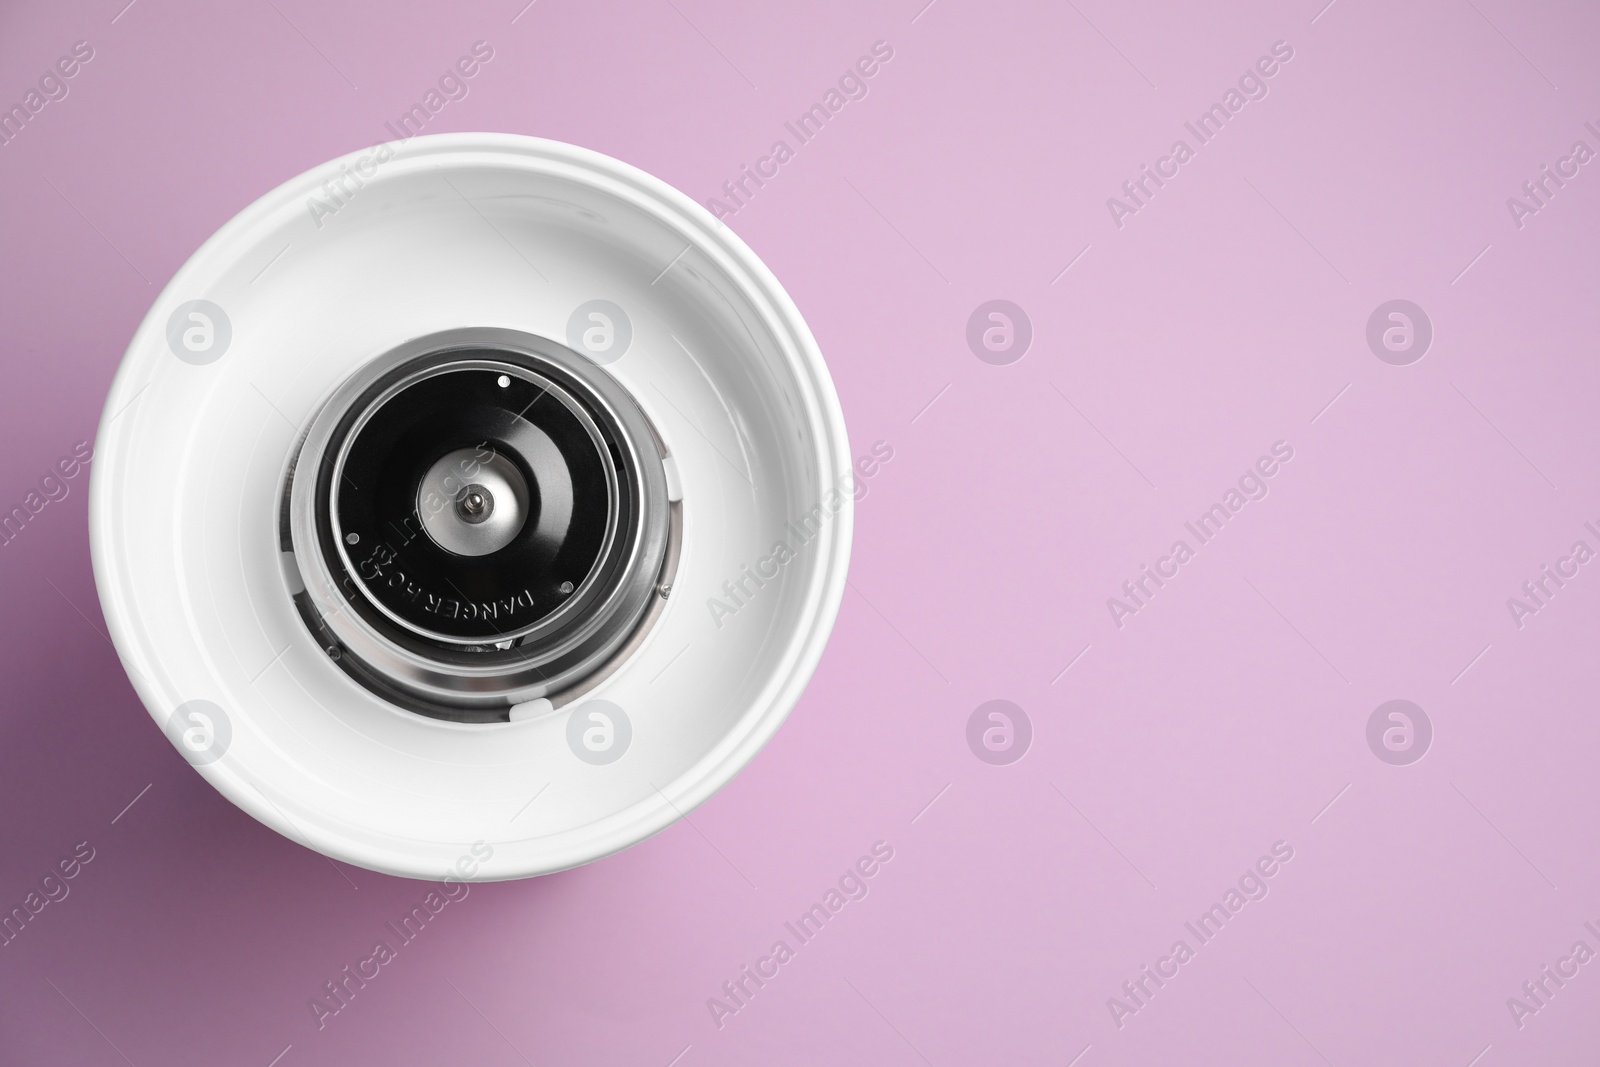 Photo of Portable candy cotton machine on violet background, top view. Space for text